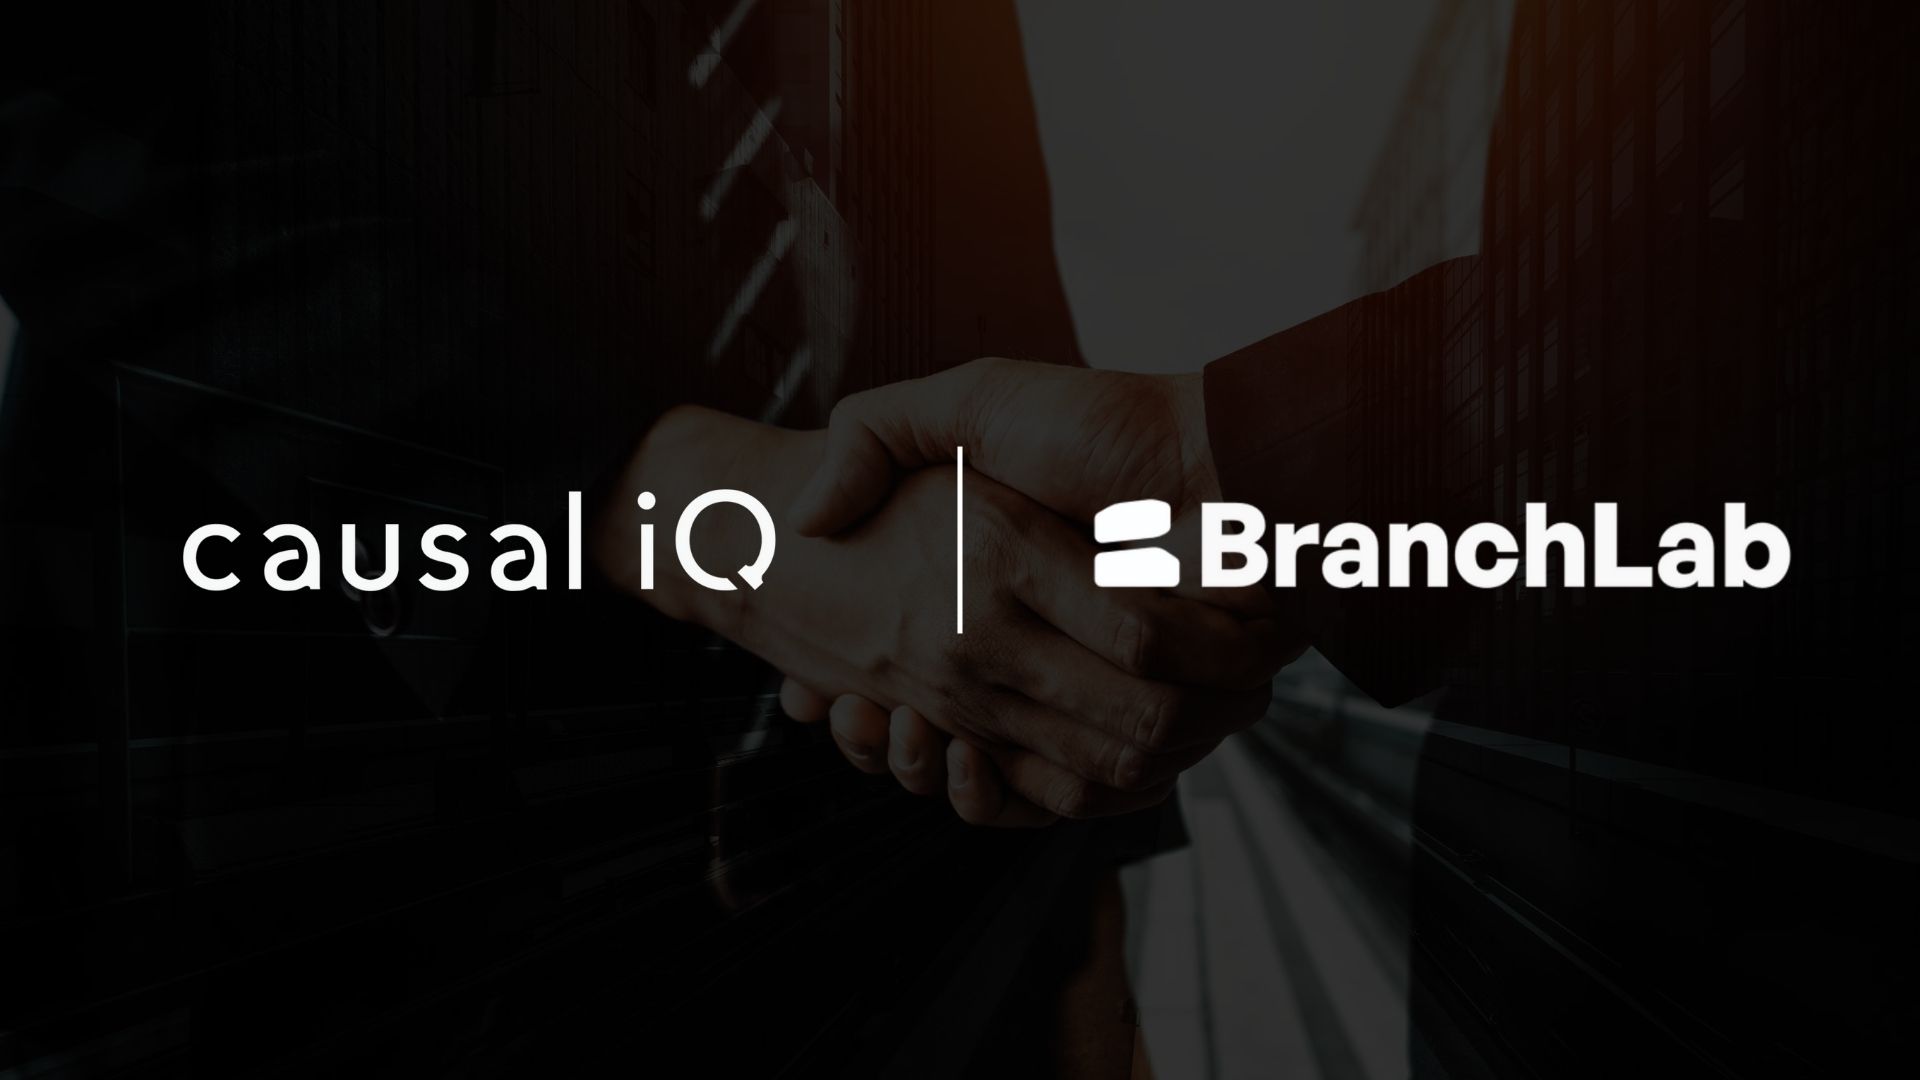 Causal IQ Launches Innovative 'ID-less' Healthcare Audience Solution in Partnership with BranchLab